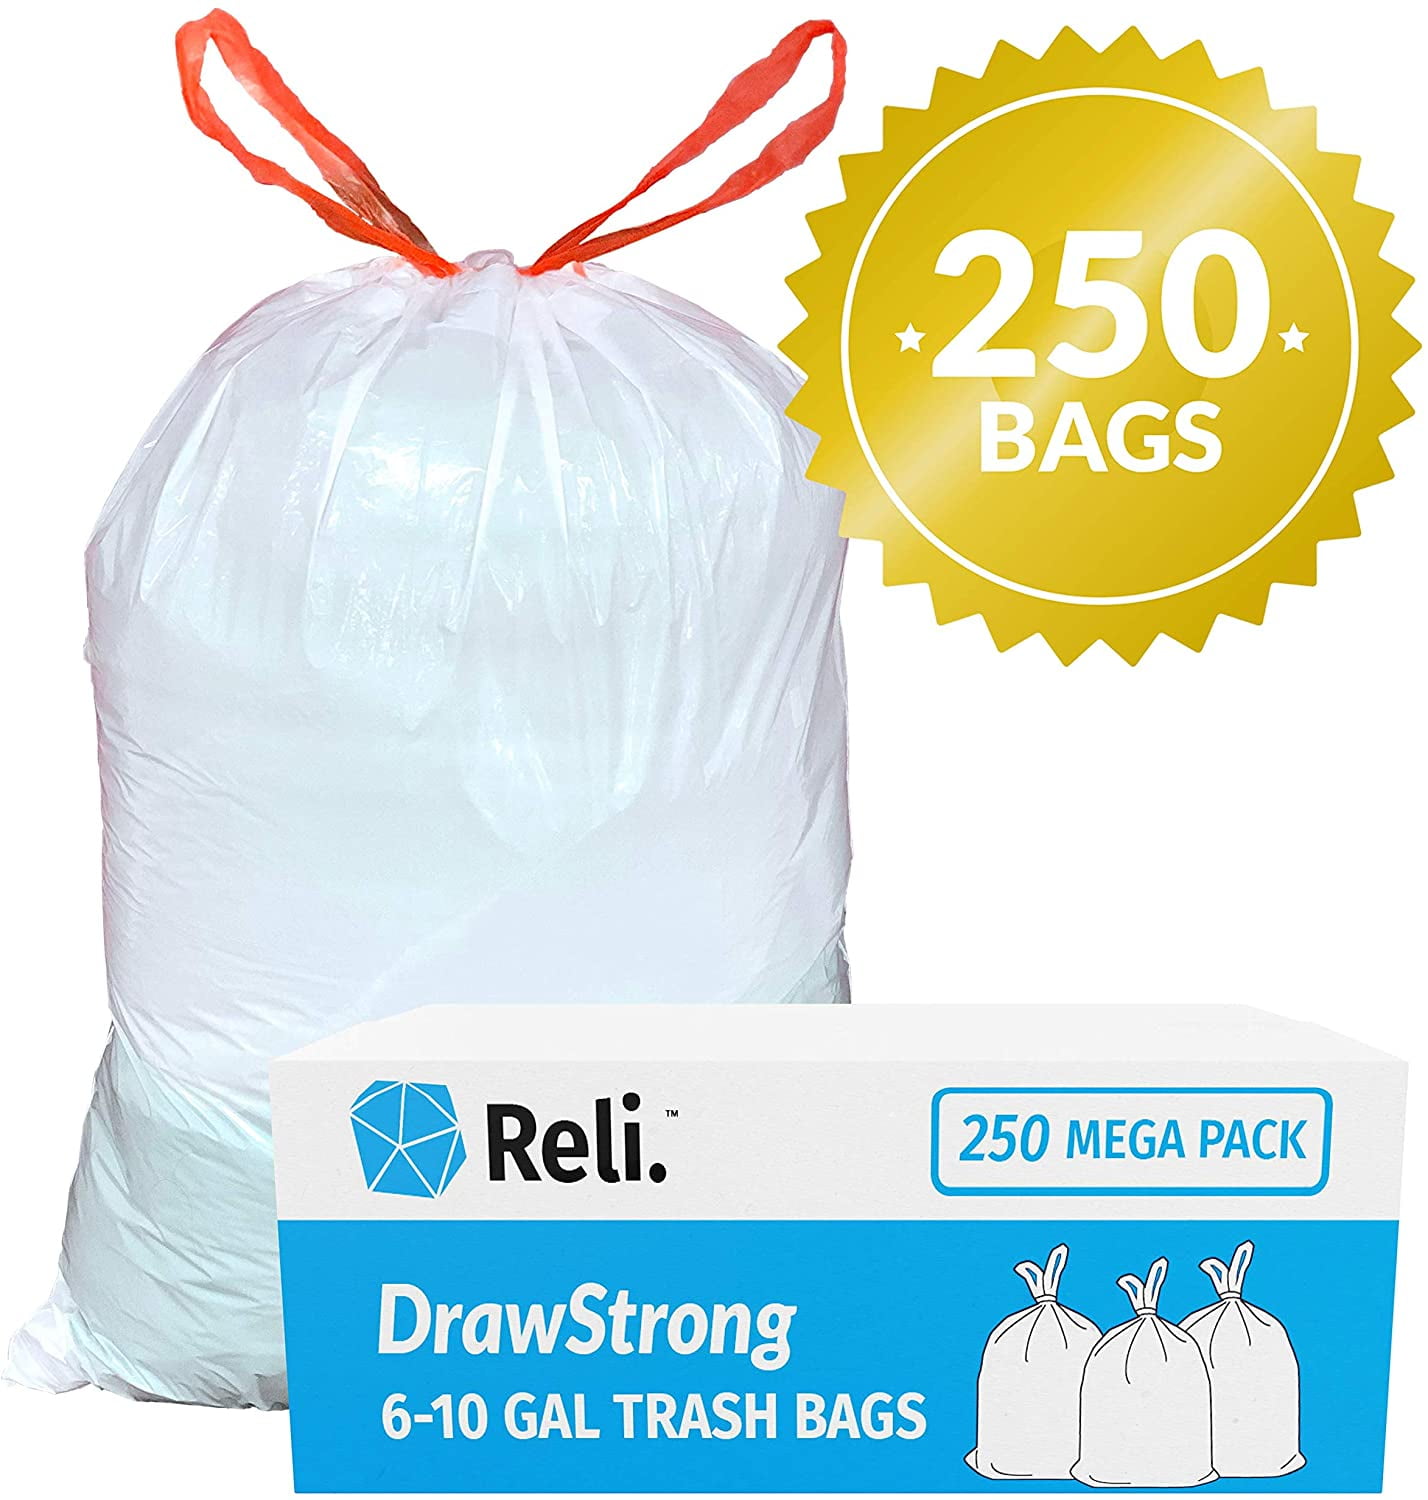 Fit 7,8,9,10 Gallon 24x 24 Soft Small Trash Plastic Bag Can Liner All Purpose General HDPE High Density Janitorial Commerical Home Office Waste Bag Garbage for Soft Trash 200/Pack 